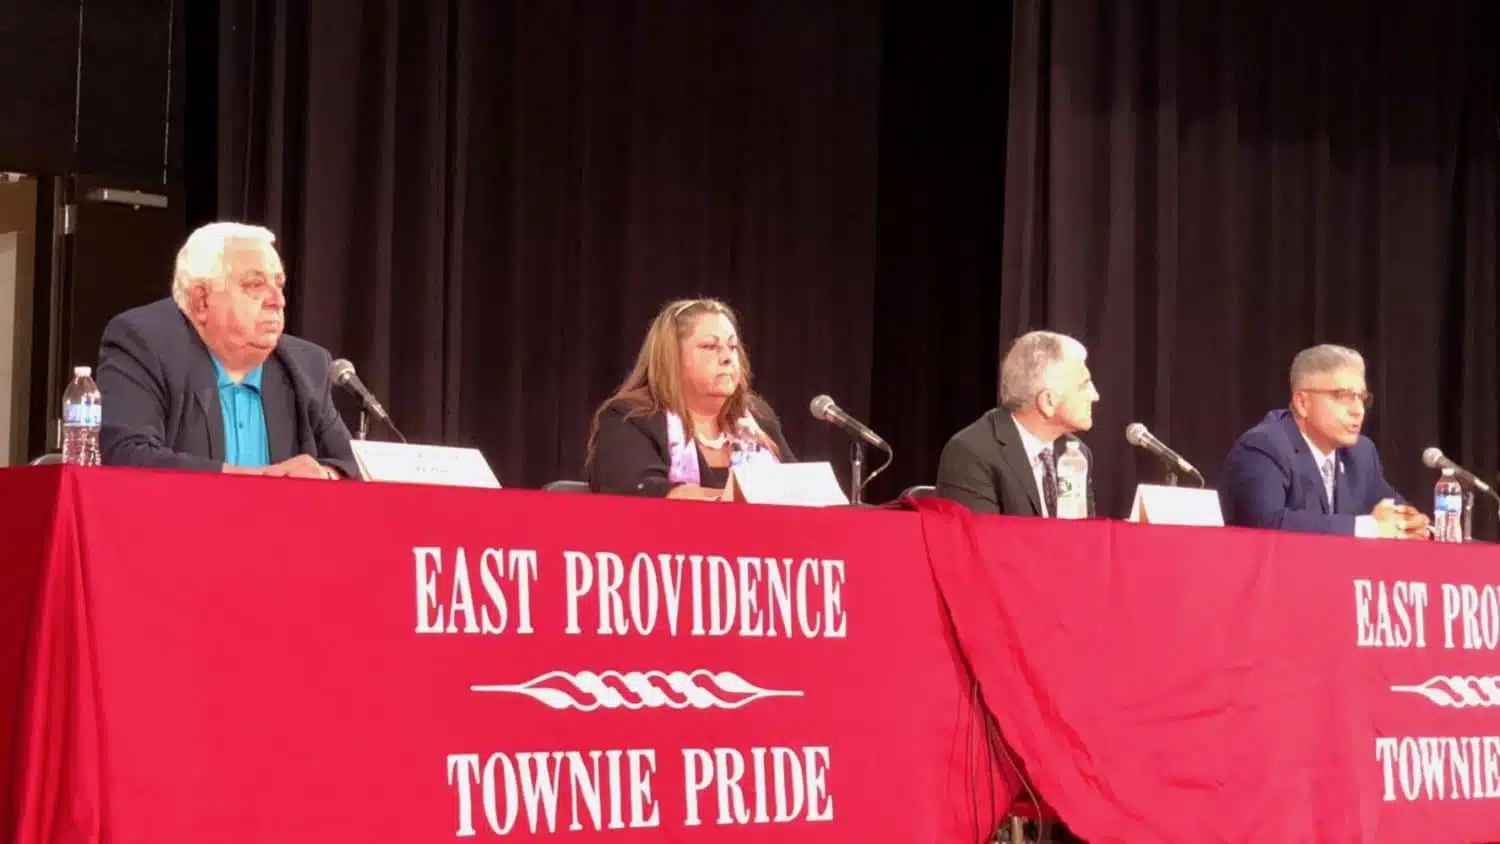 Video from the East Providence Mayoral Forum